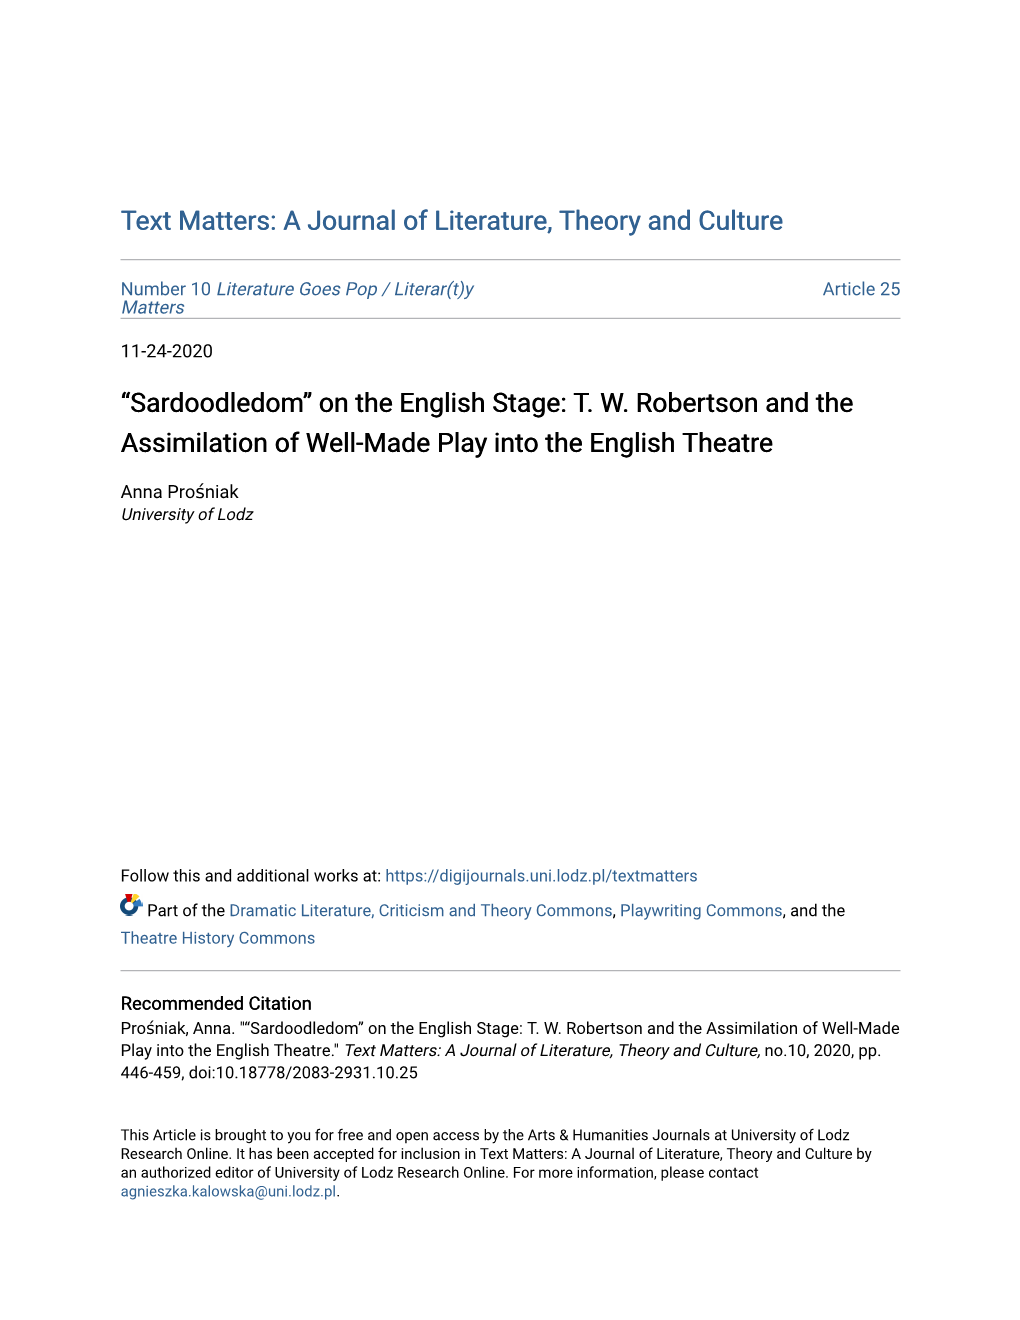 T. W. Robertson and the Assimilation of Well-Made Play Into the English Theatre